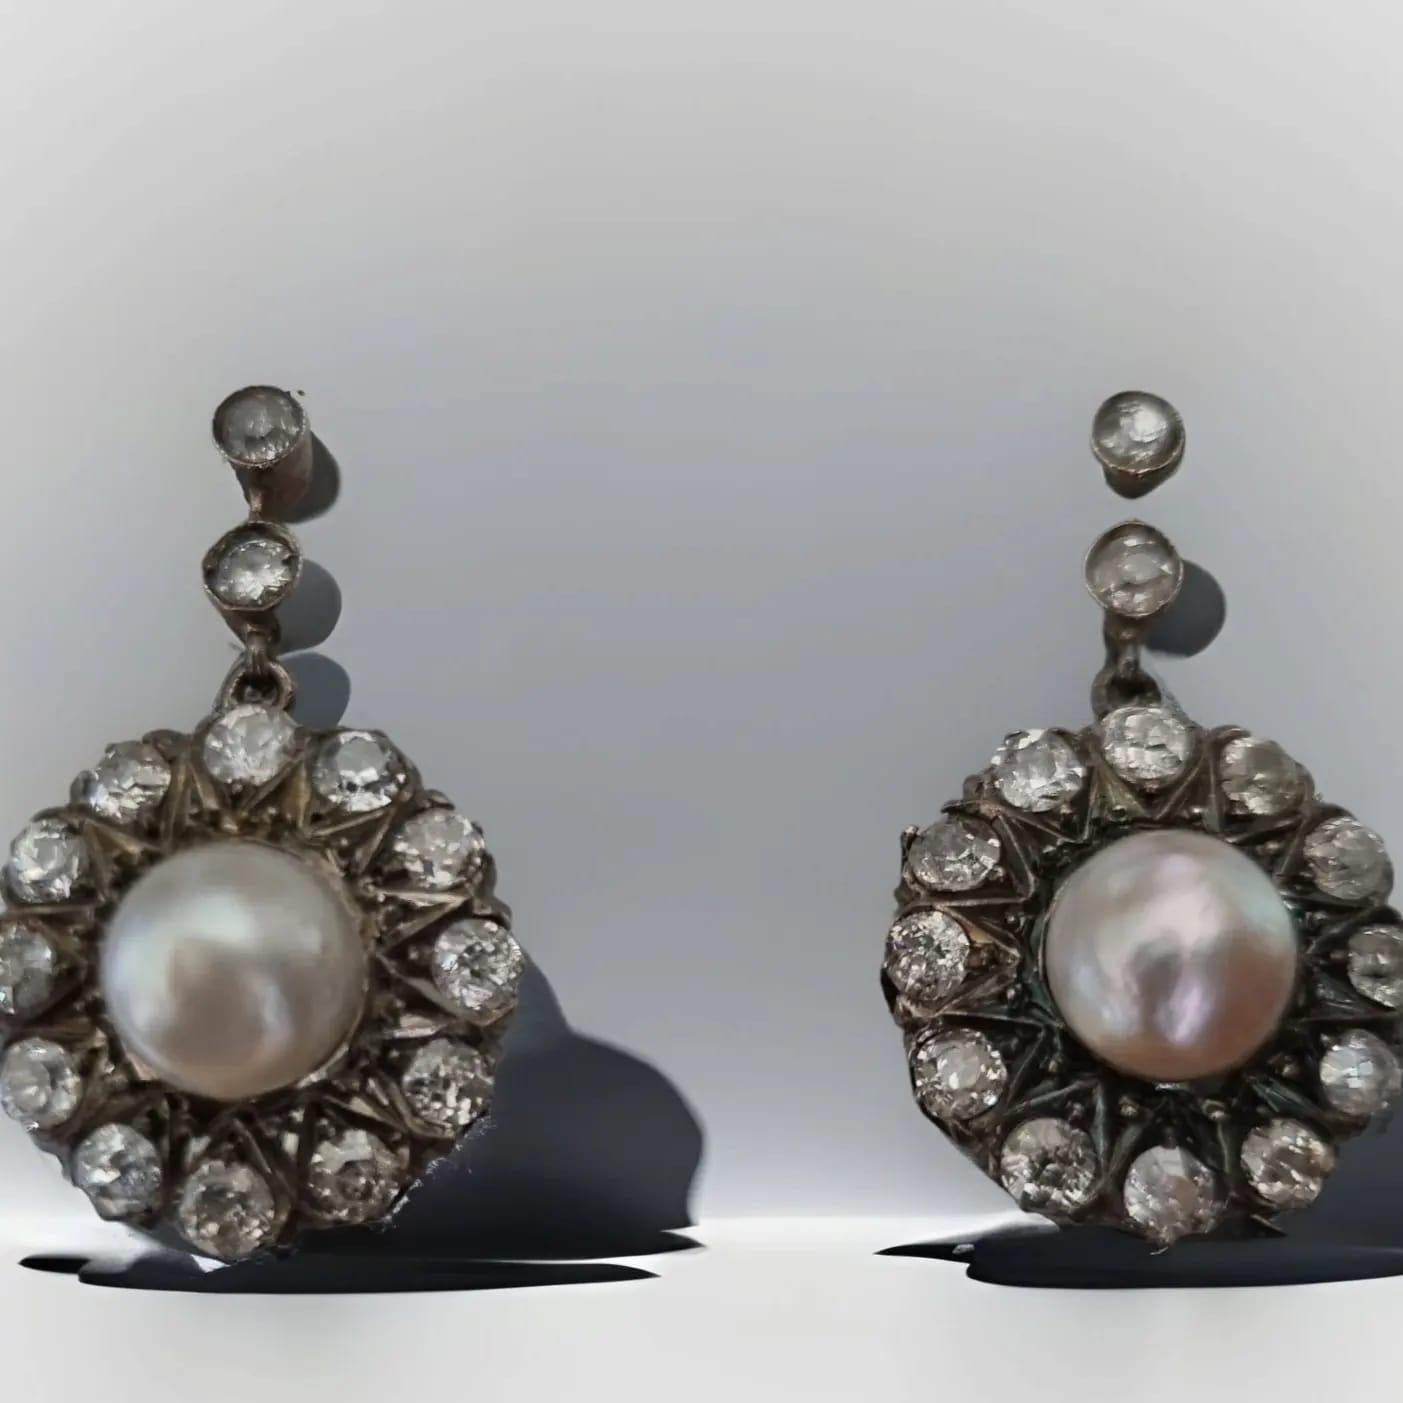 Victorian Pearl and Diamond Dangle Earrings (19Th Century)
Dangle earbobs, bright and sparkling European-cut diamonds descend like dewdrops, centered by luminous white body color pearls  and an intense silvery orient, and encircled by scintillating